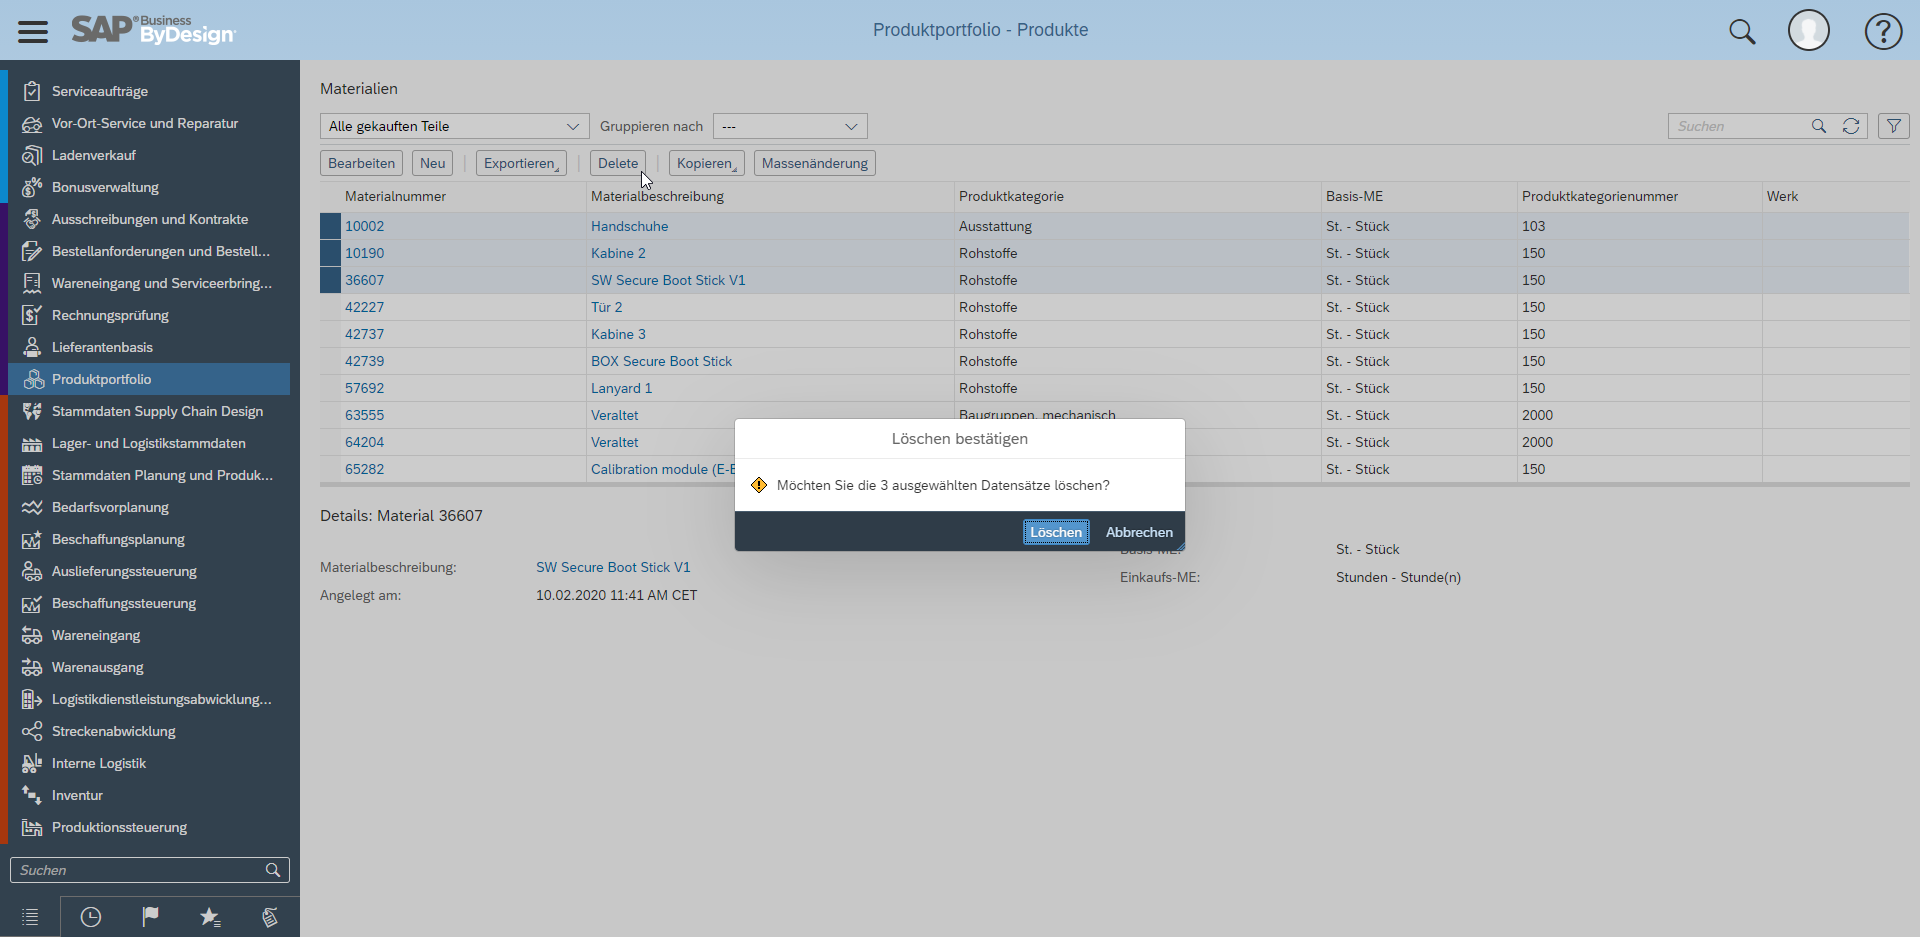 Highlight Features des SAP Business ByDesign Release 2011_4